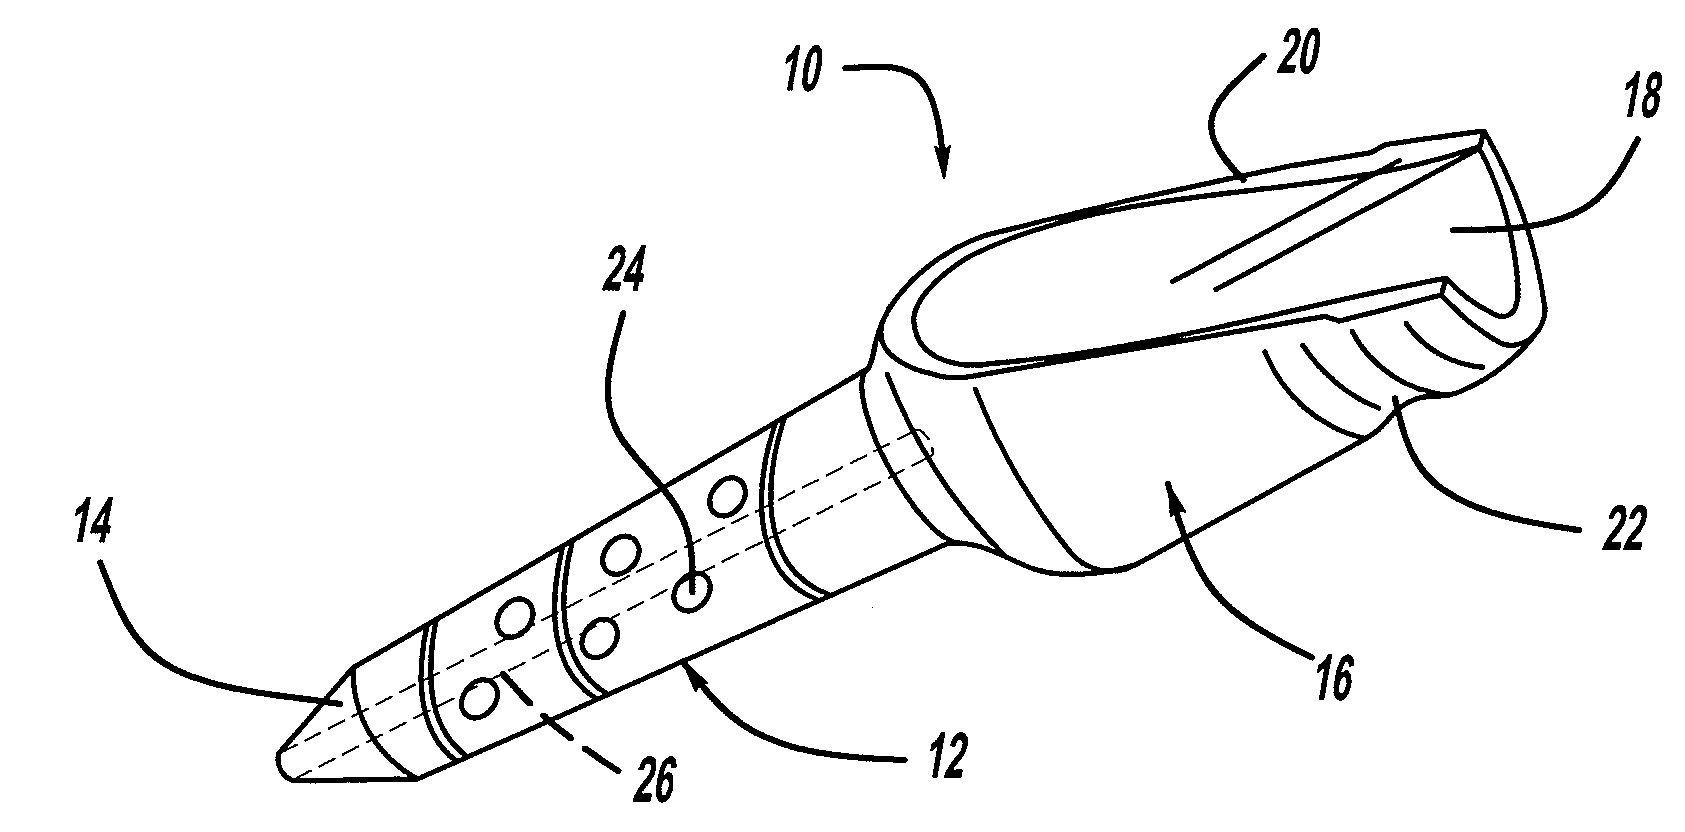 Surgical Screw Including a Body that Facilitates Bone In-Growth